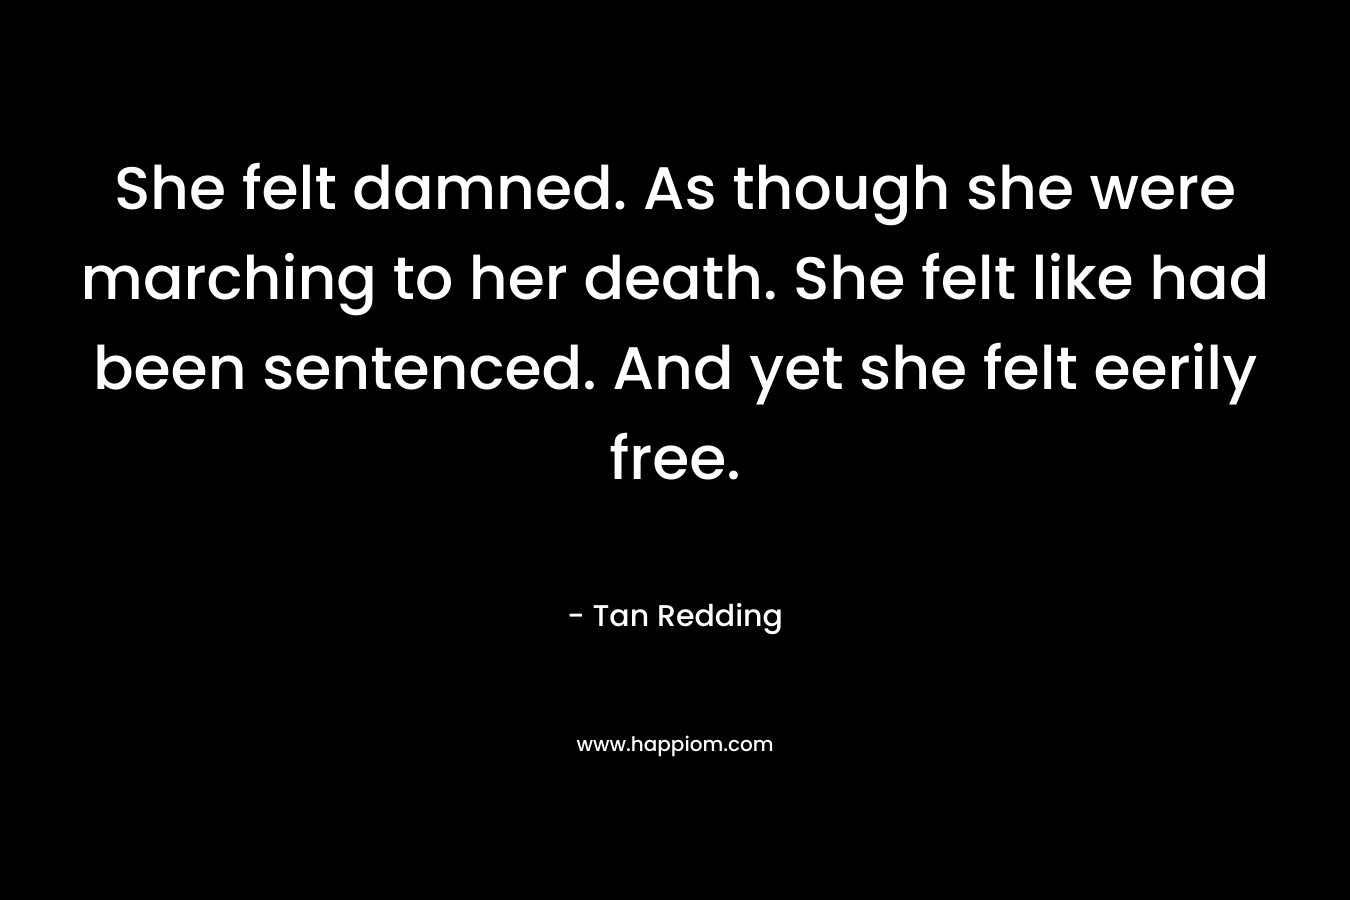 She felt damned. As though she were marching to her death. She felt like had been sentenced. And yet she felt eerily free.